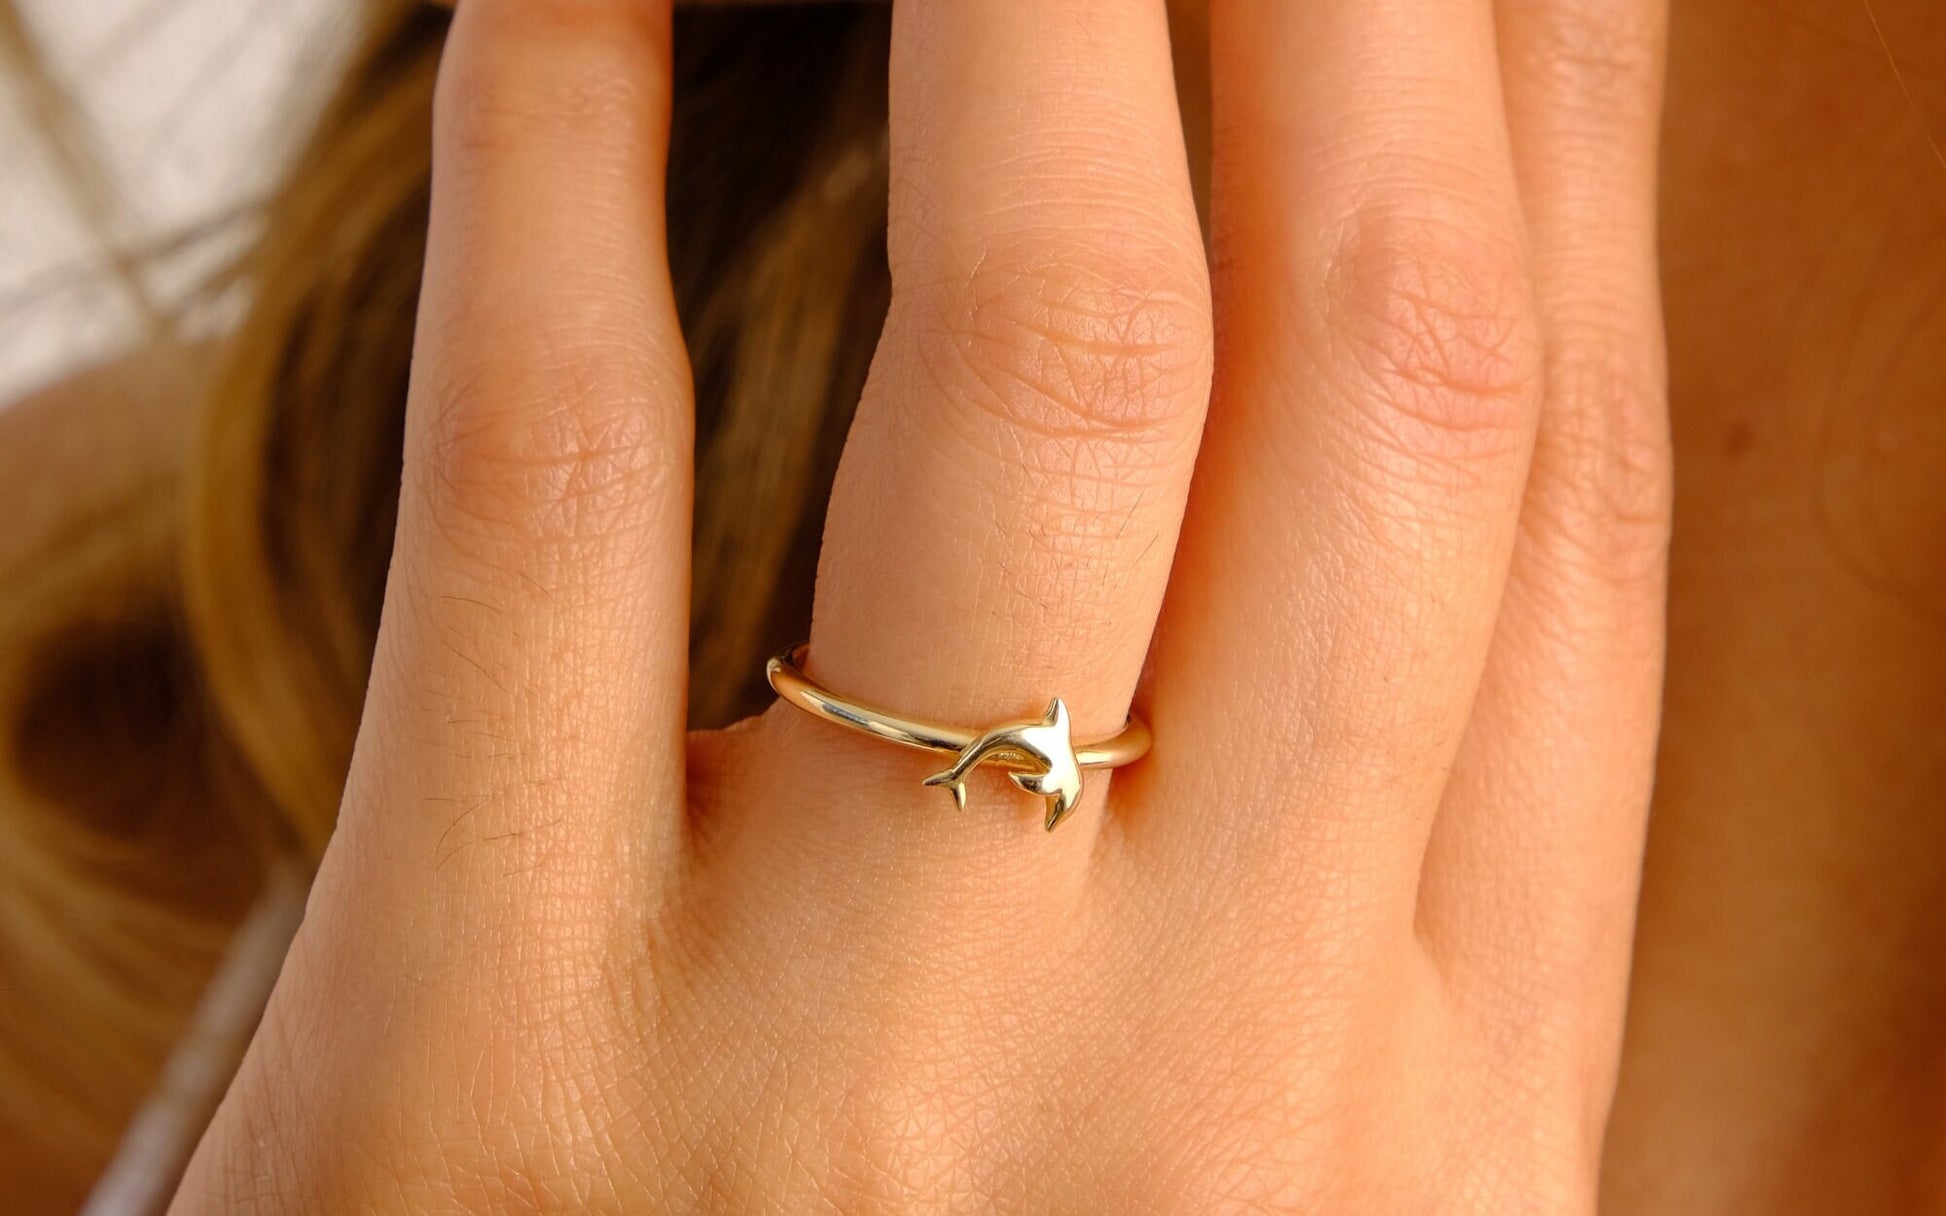 14K Gold Dolphin Ring, Dolphin Band Ring For Women, Delicate Animal Ring, Stackable Ring Ocean Lover Gift, Sea Animal Jewelry